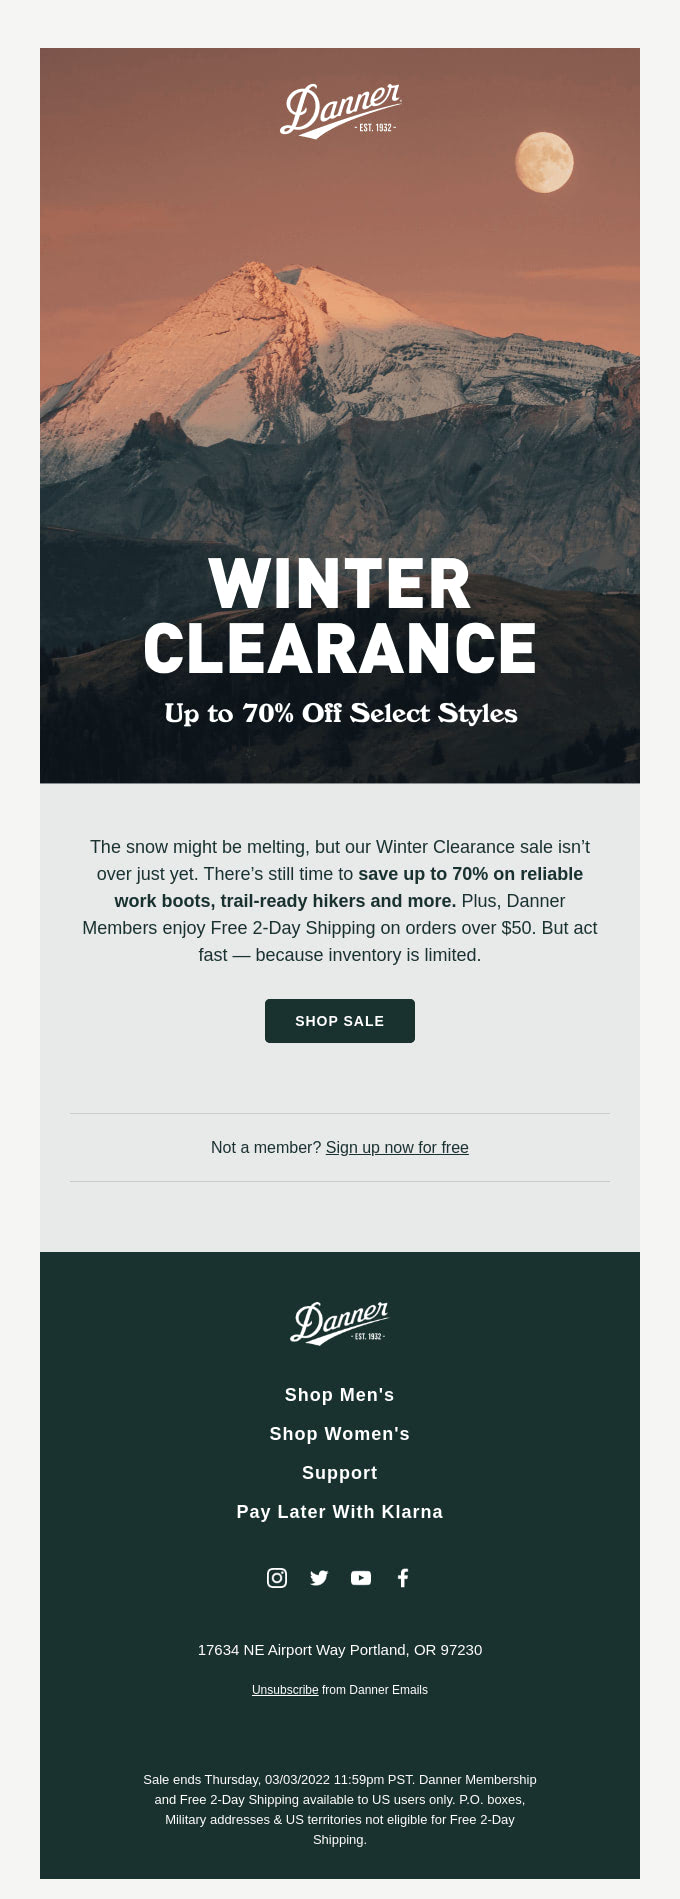 January Email Newsletter Examples